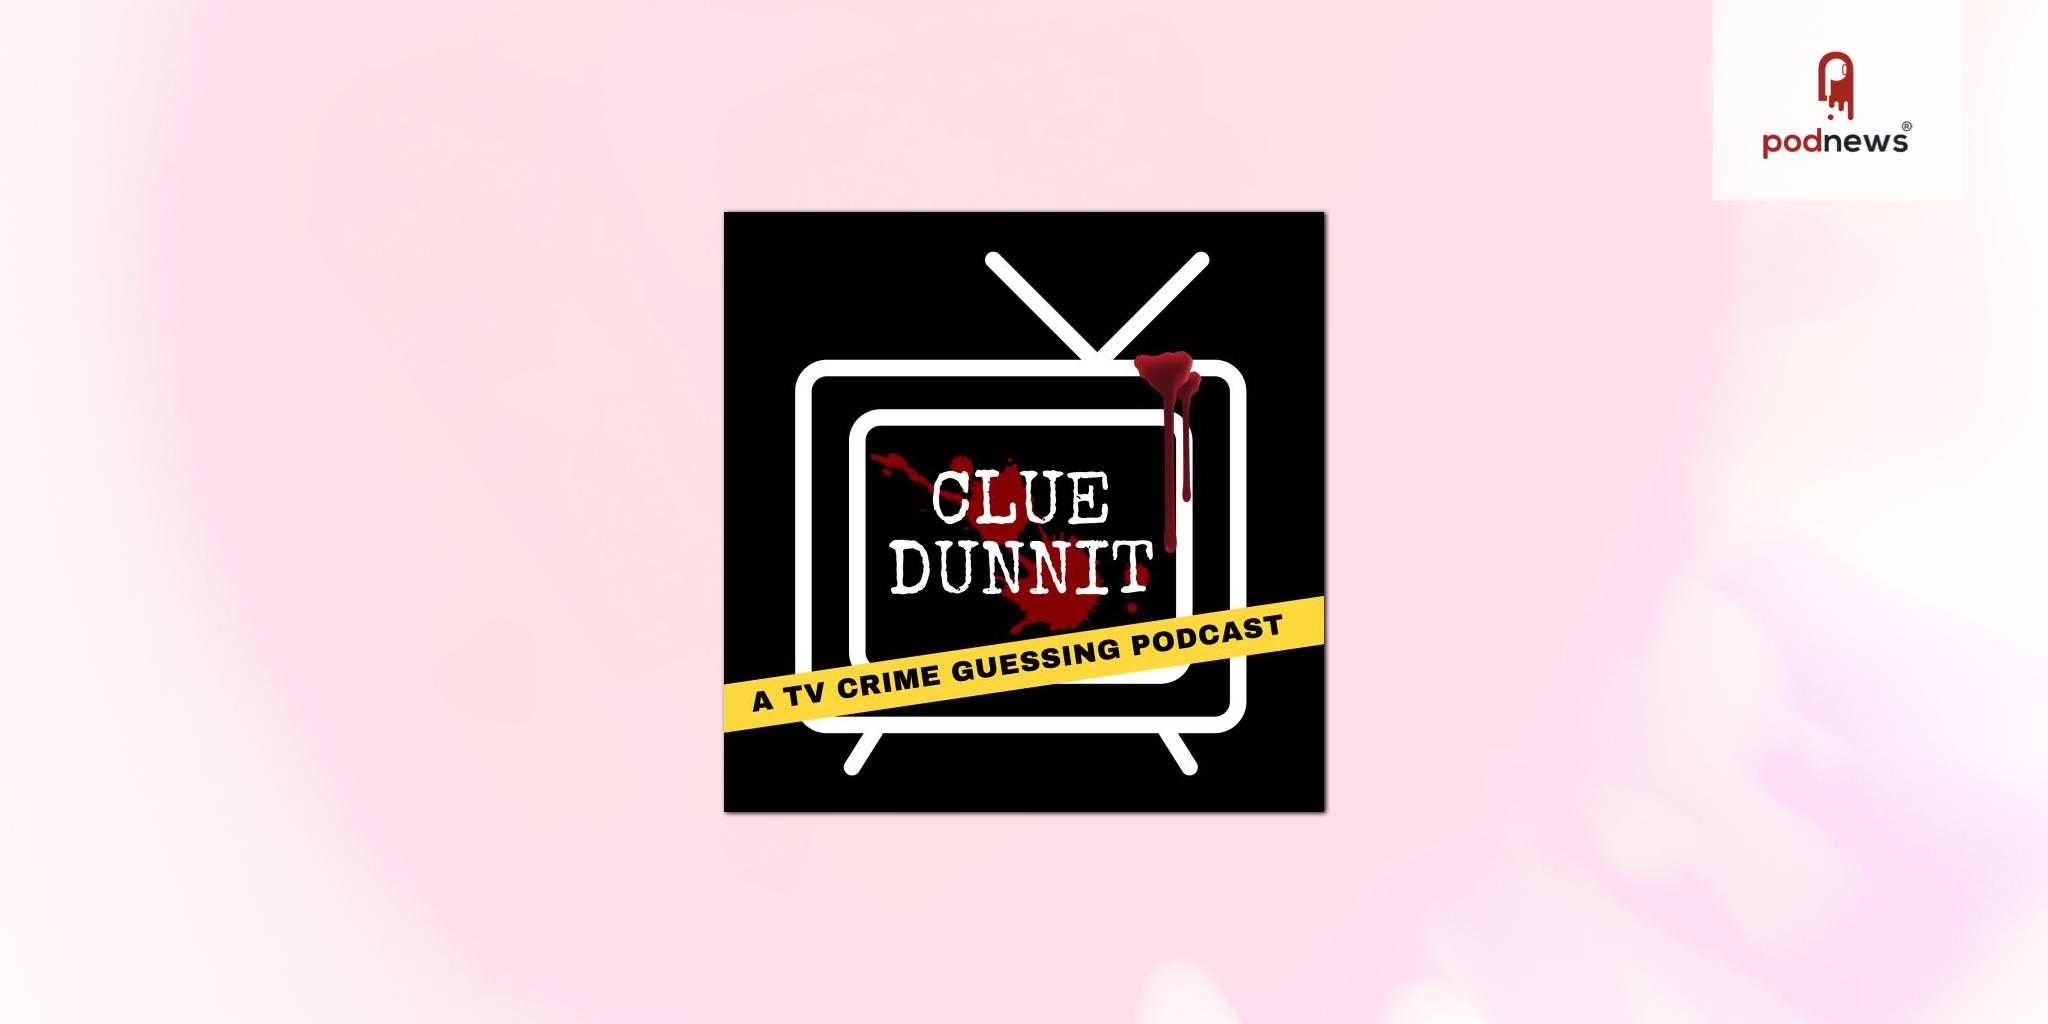 Cluedunnit Podcast, the comedy podcast that plays the game of TV mystery procedurals and making wild guesses